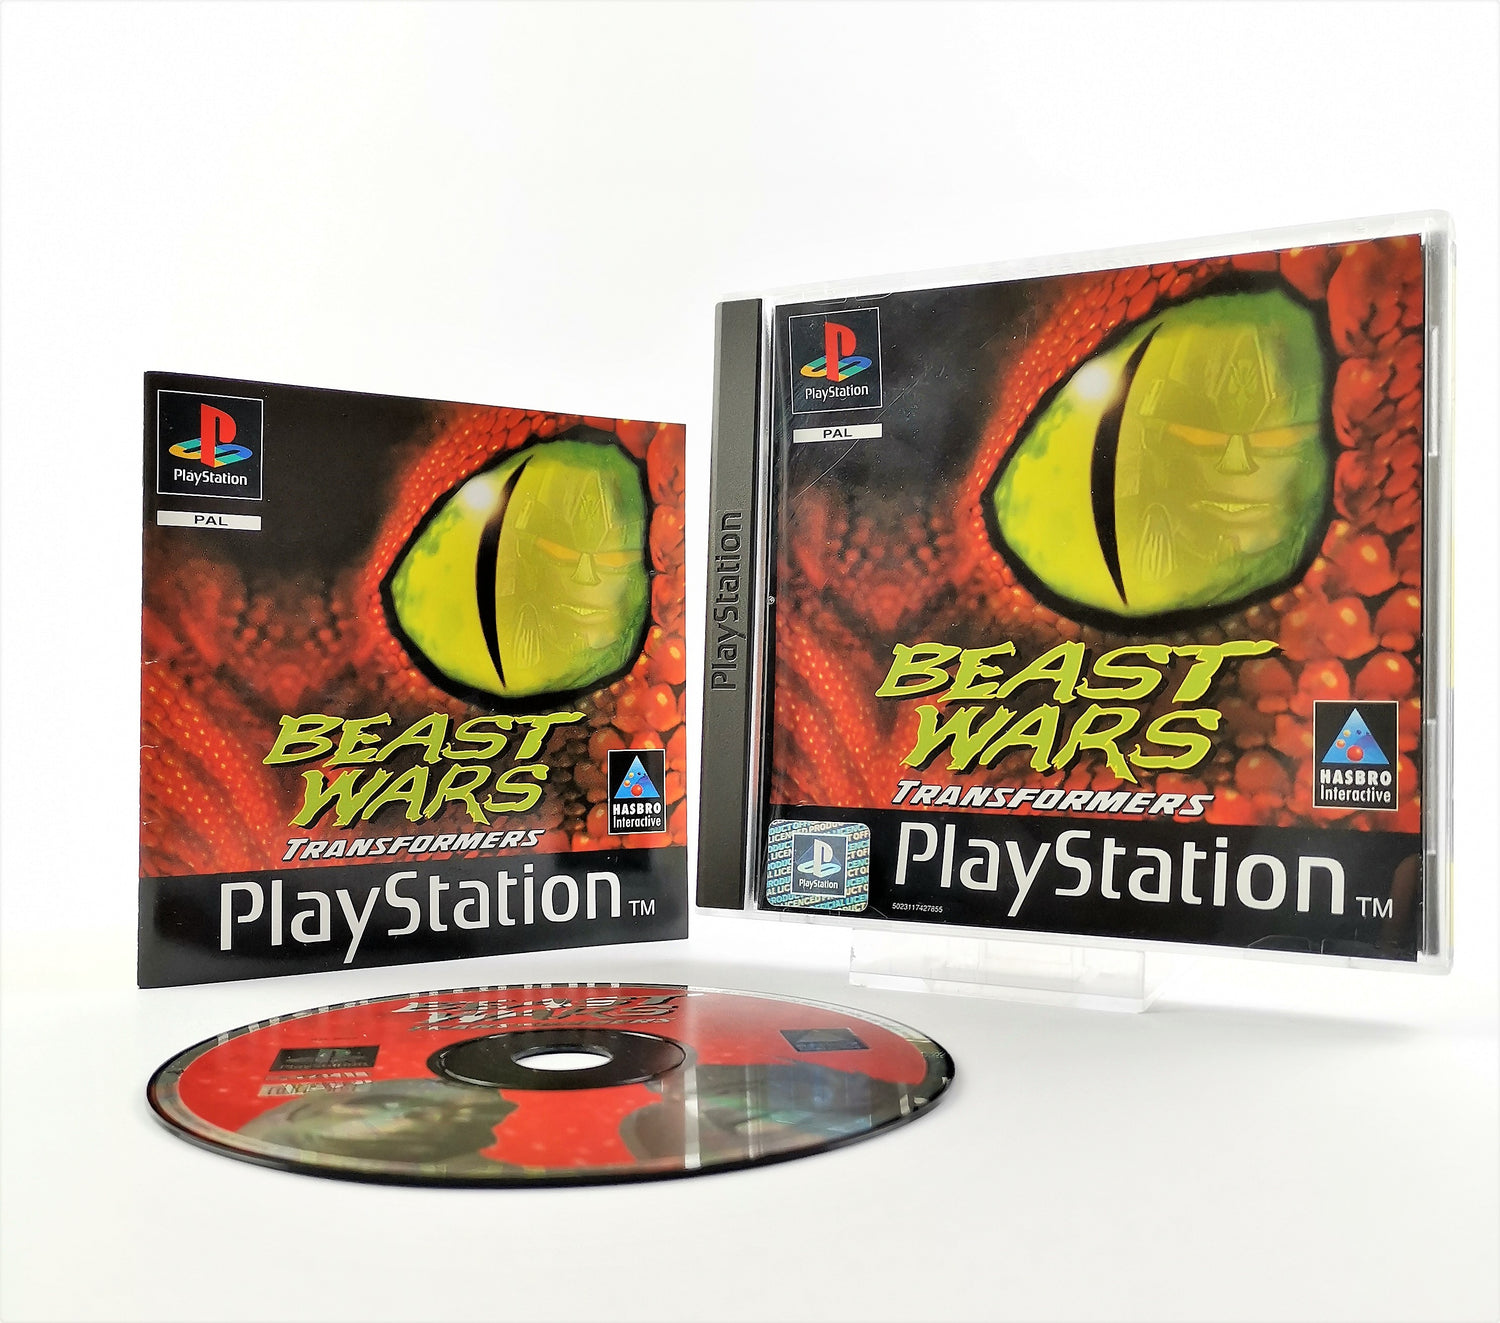 Sony Playstation 1 Game: Beast Wars Transformers - OVP & Instructions PAL PS1 PSX